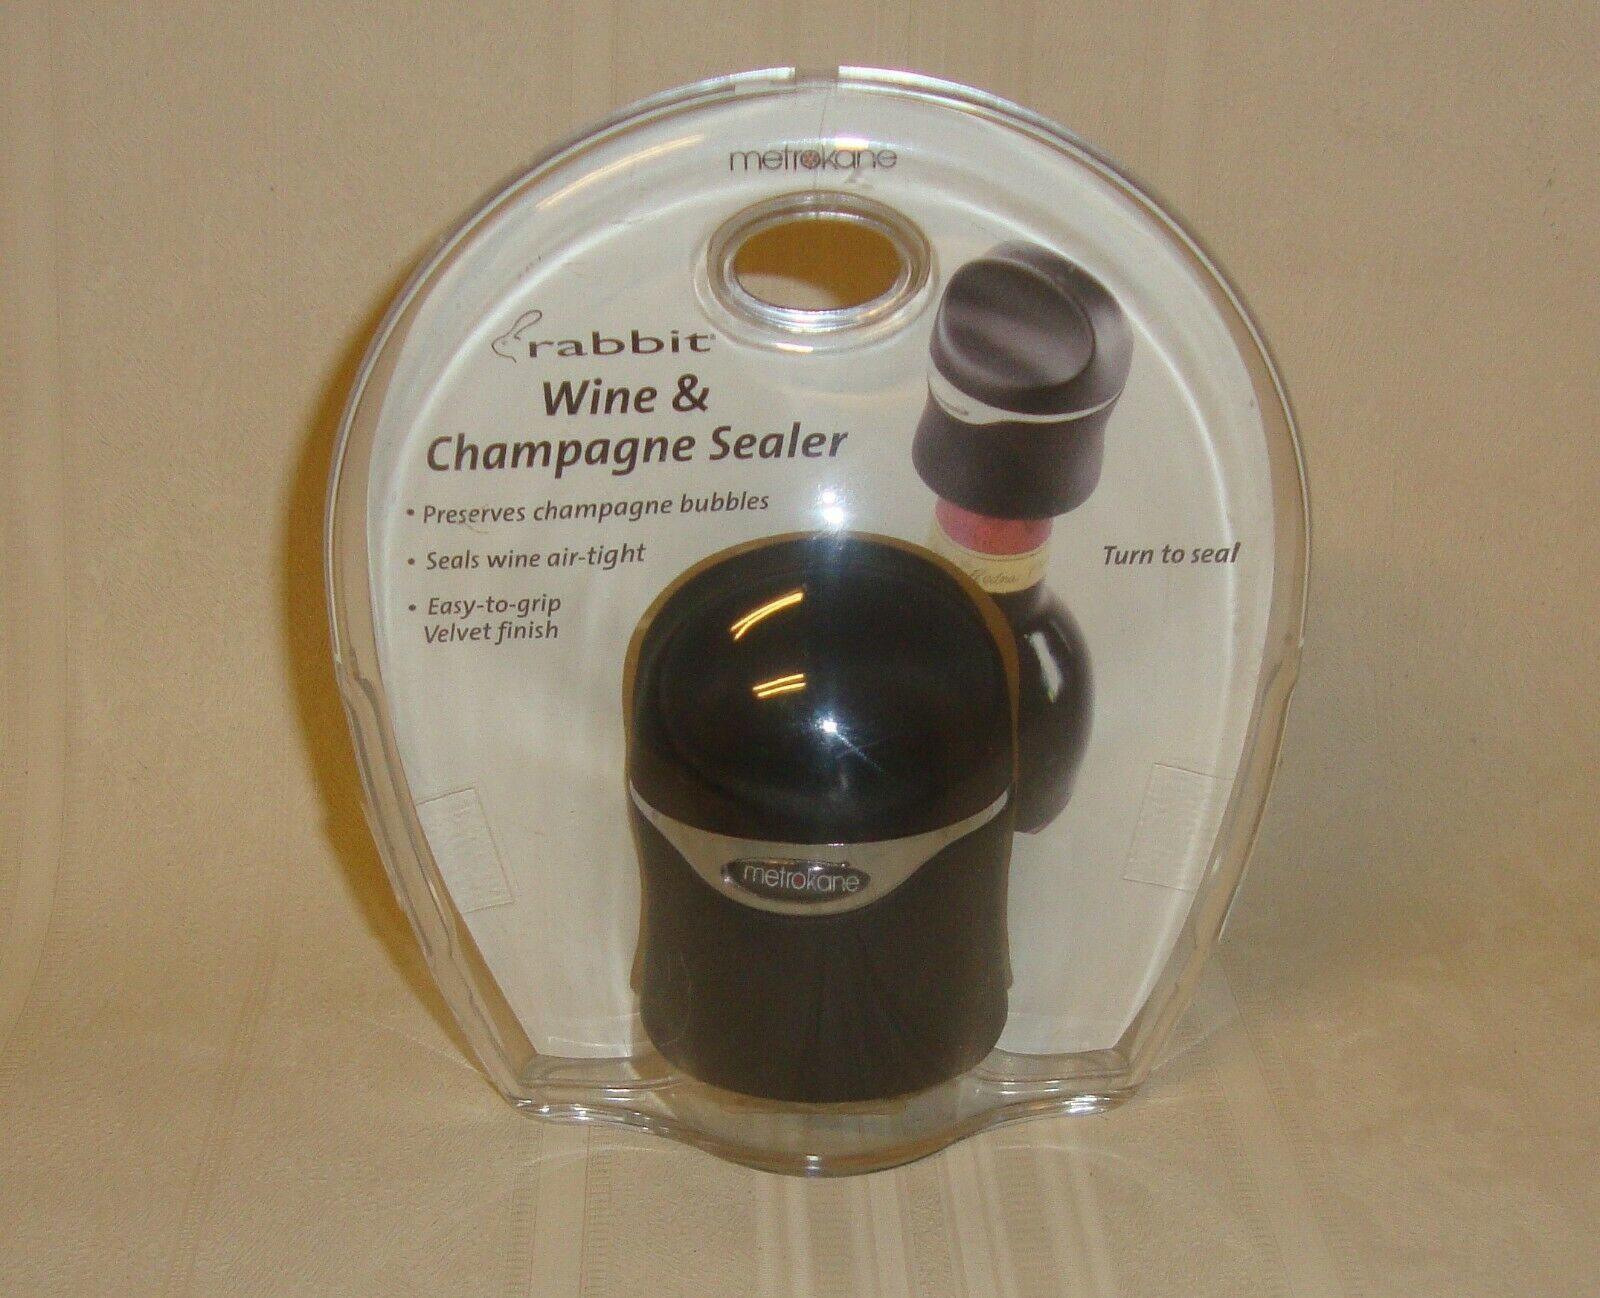 Rabbit Black Champagne and Wine Sealer NEW Seals Wine Air tight, Easy to grip - $9.89